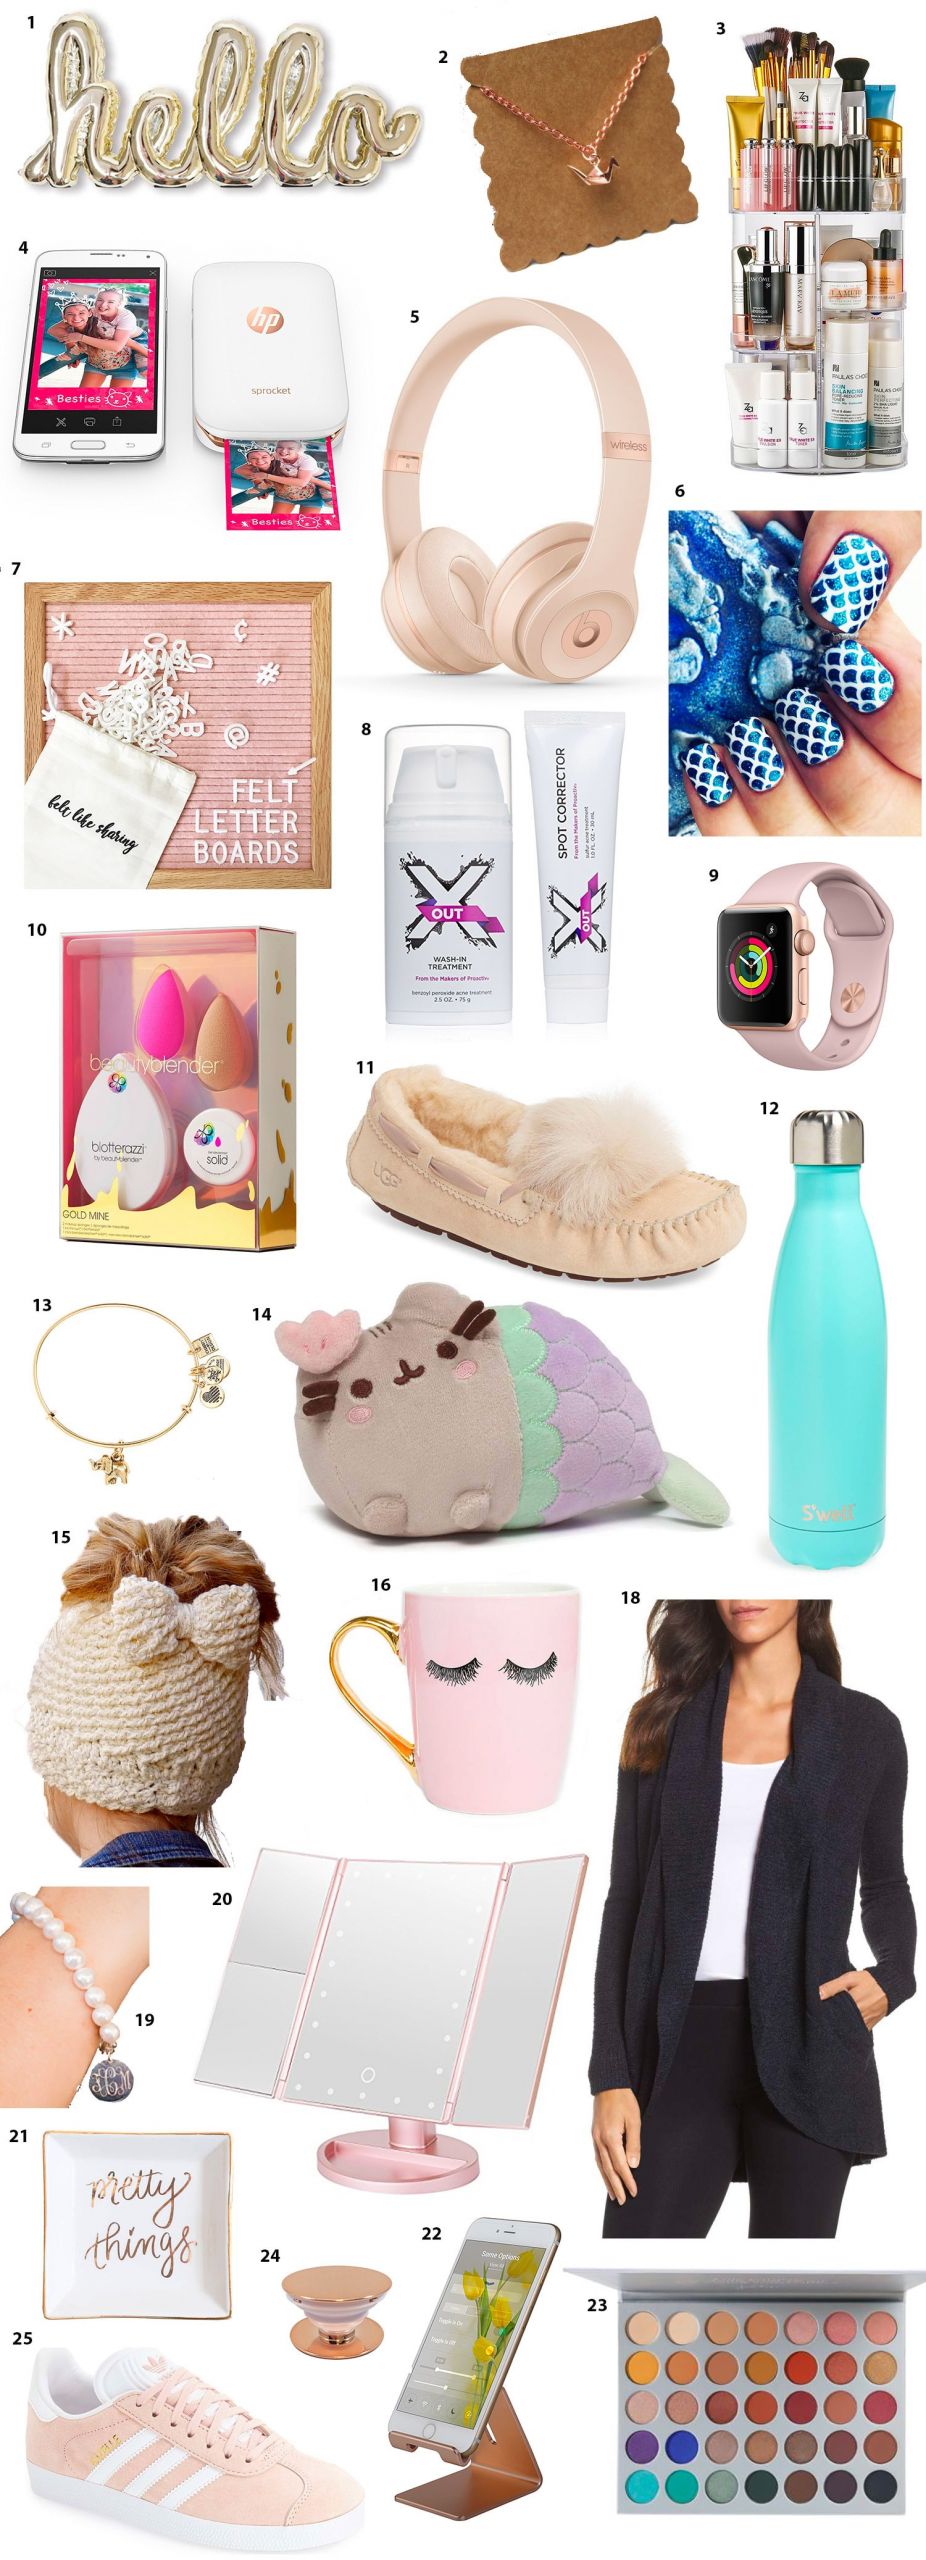 Teenage Girls Gift Ideas
 Top Gifts for Teens This Christmas